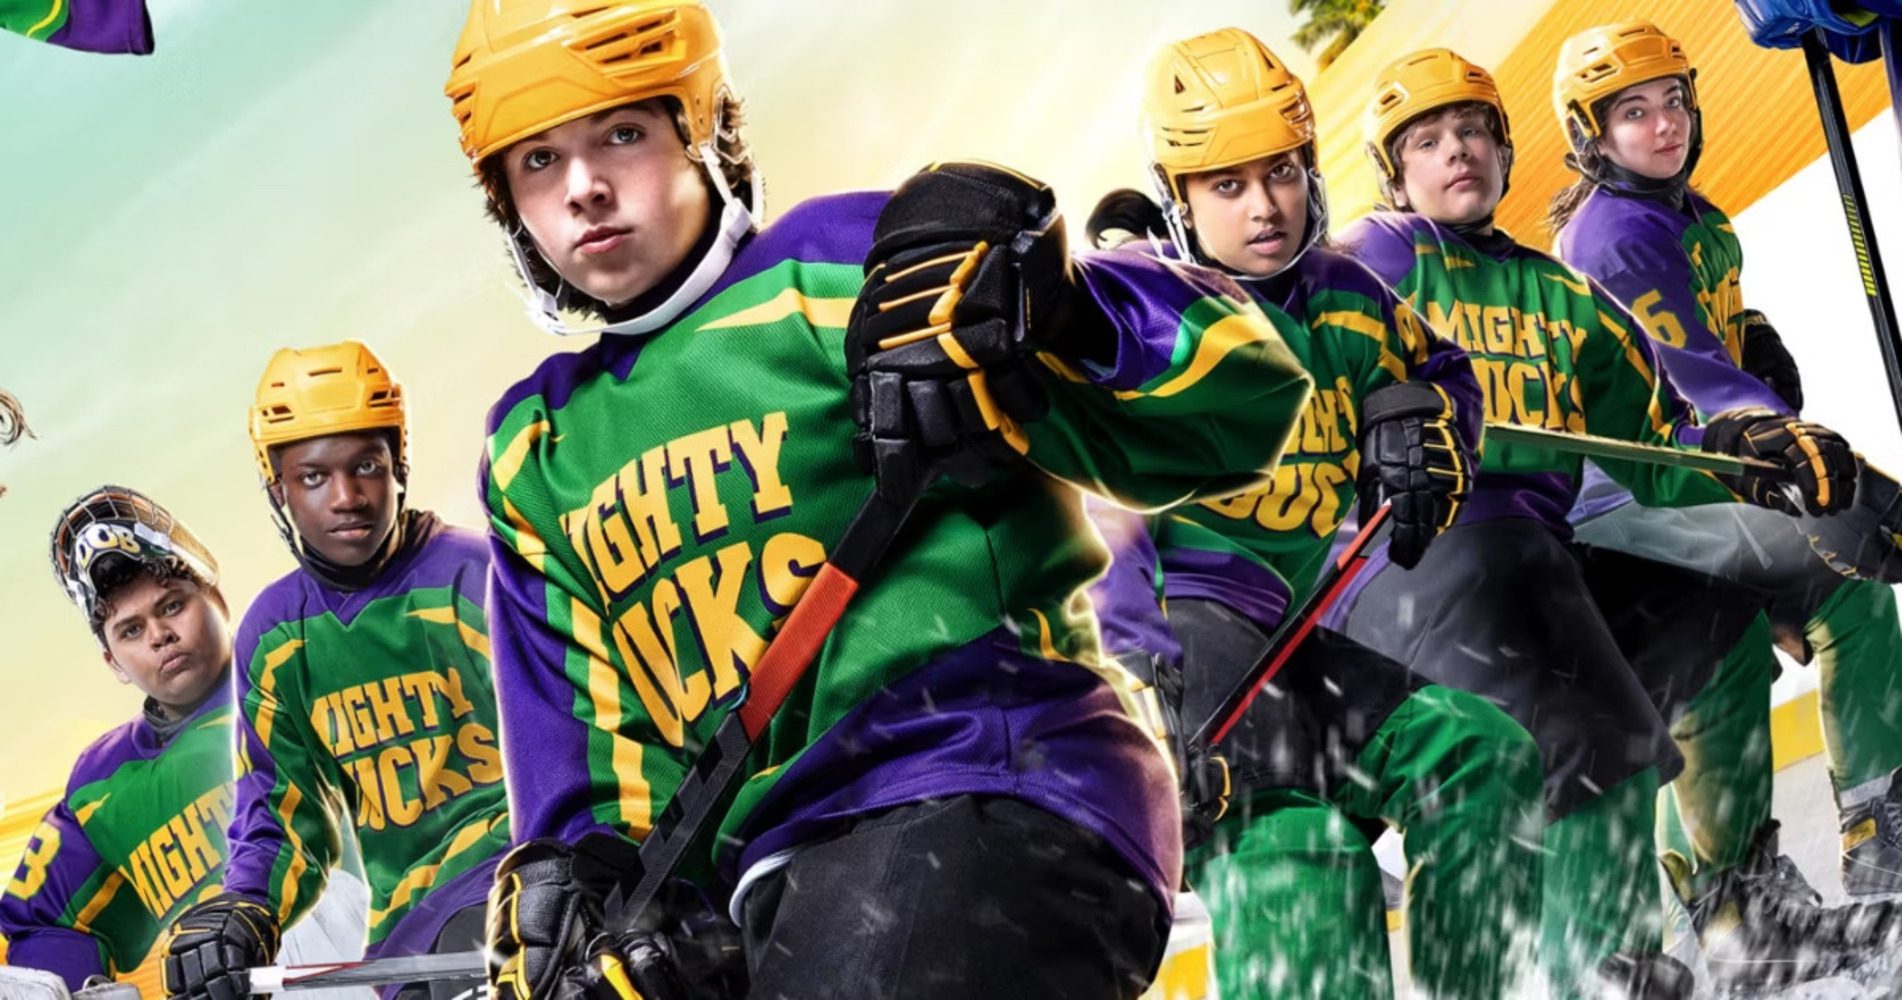 The Mighty Ducks Game Changers Season 2 Episode 2 Preview